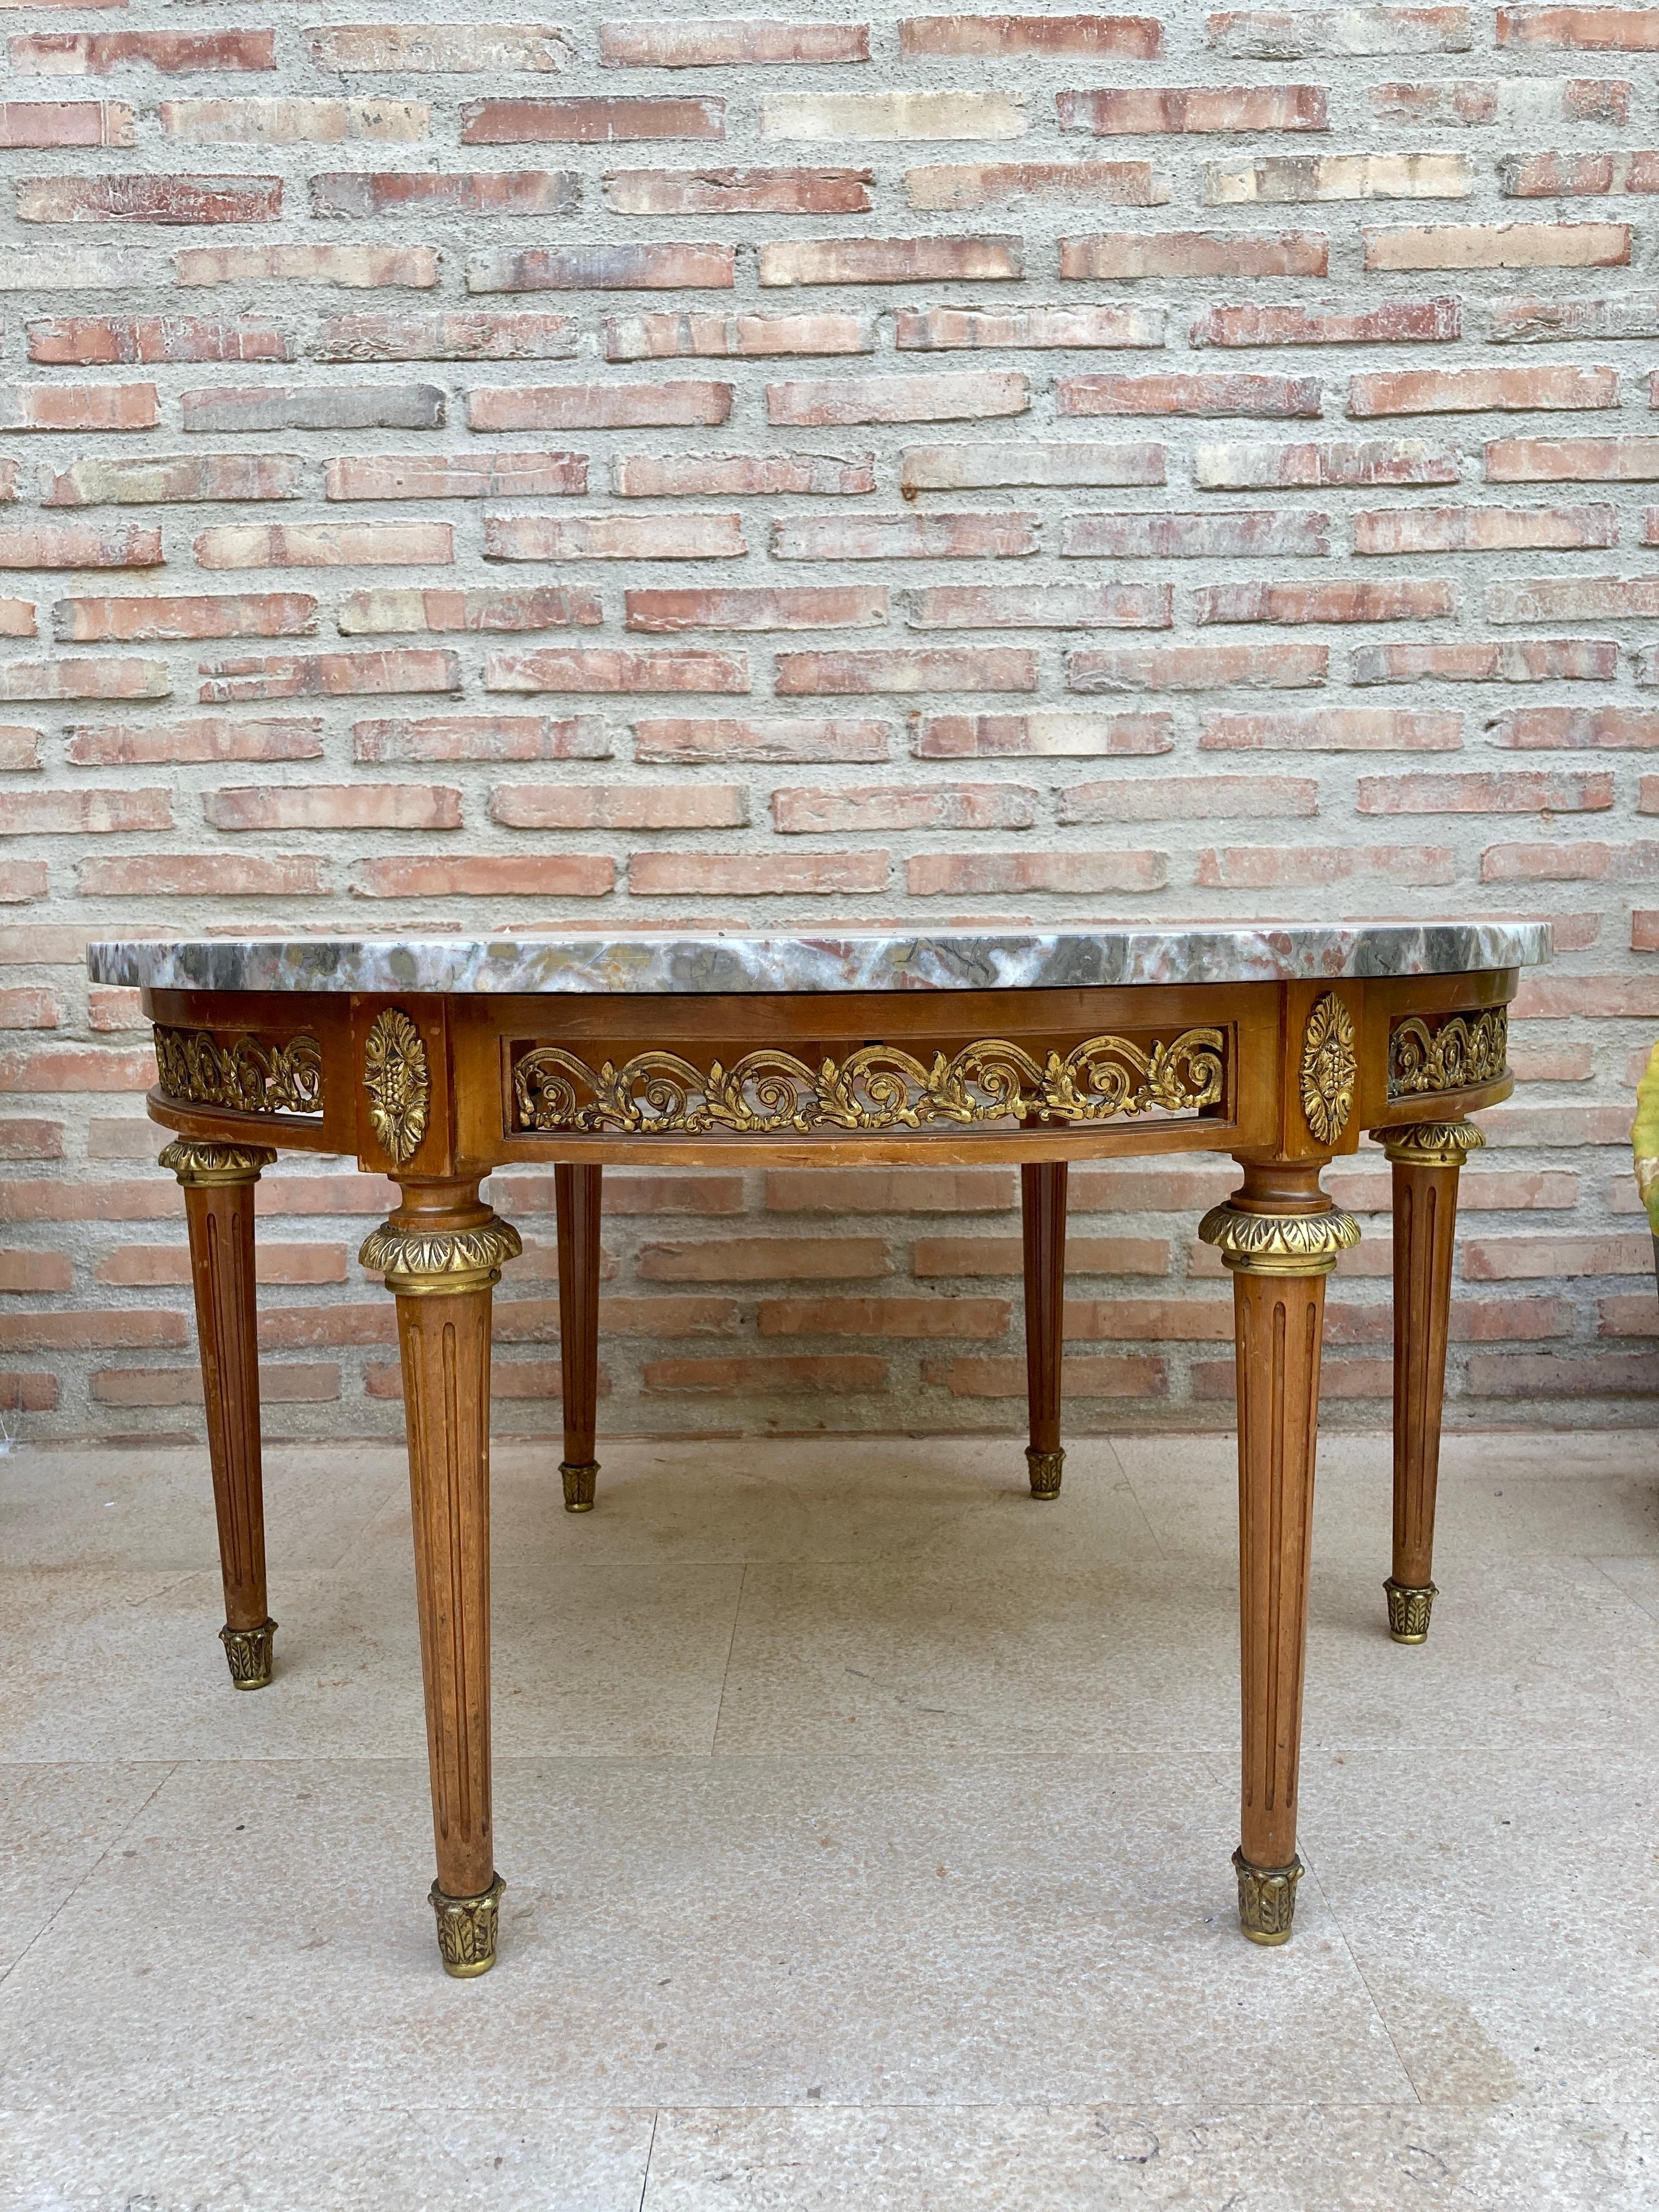 20th Century Louis XVI Style with Bronze and Round Marble French Oak Wood Table.

Solid oak with partial veneer and finely engraved bronze fixtures.